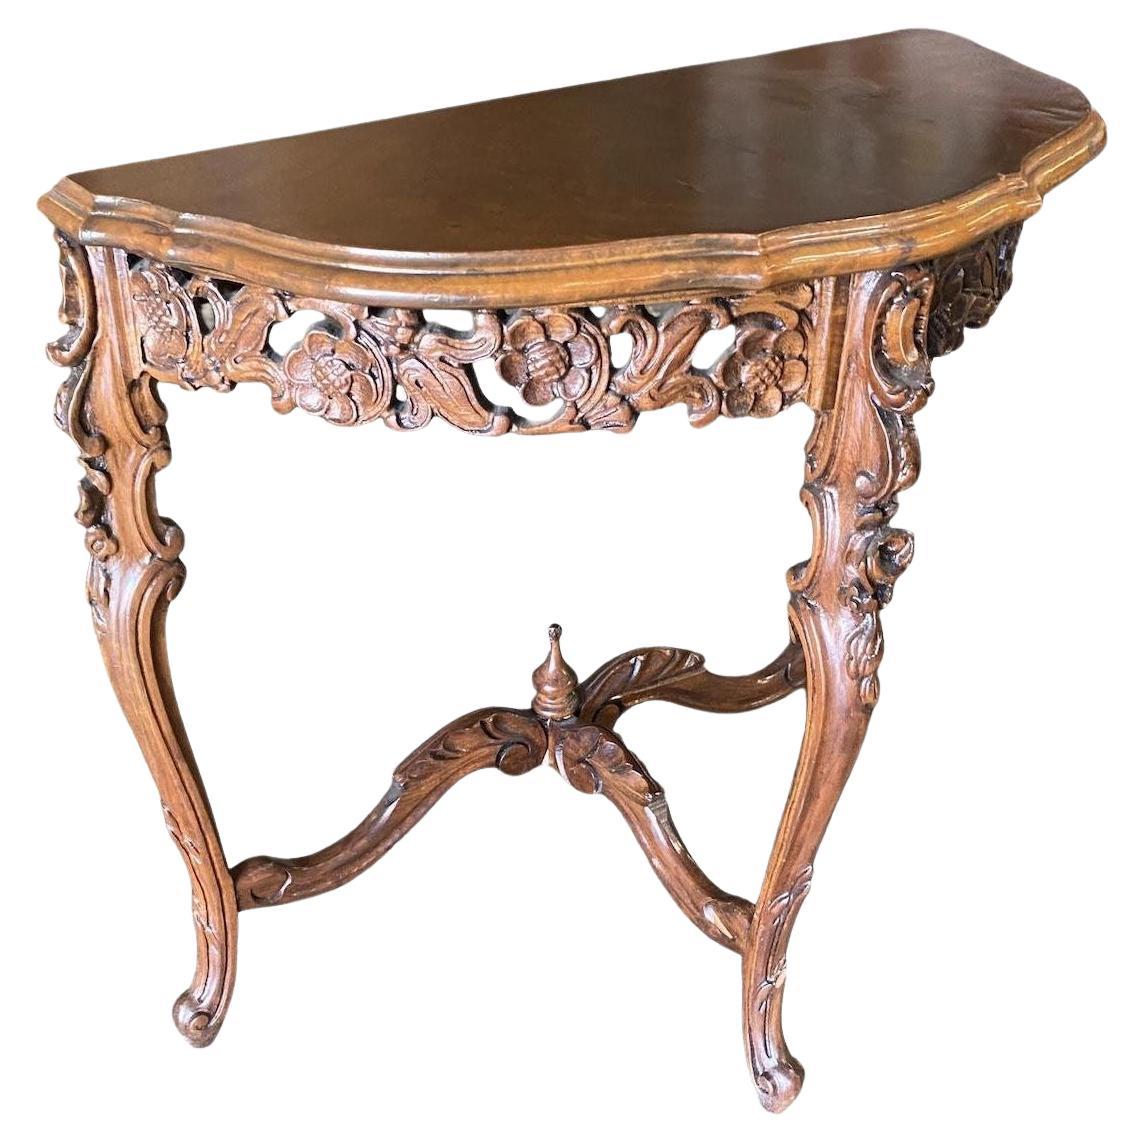 Carved Maple Queen Anne Victorian Console Table, circa 1880